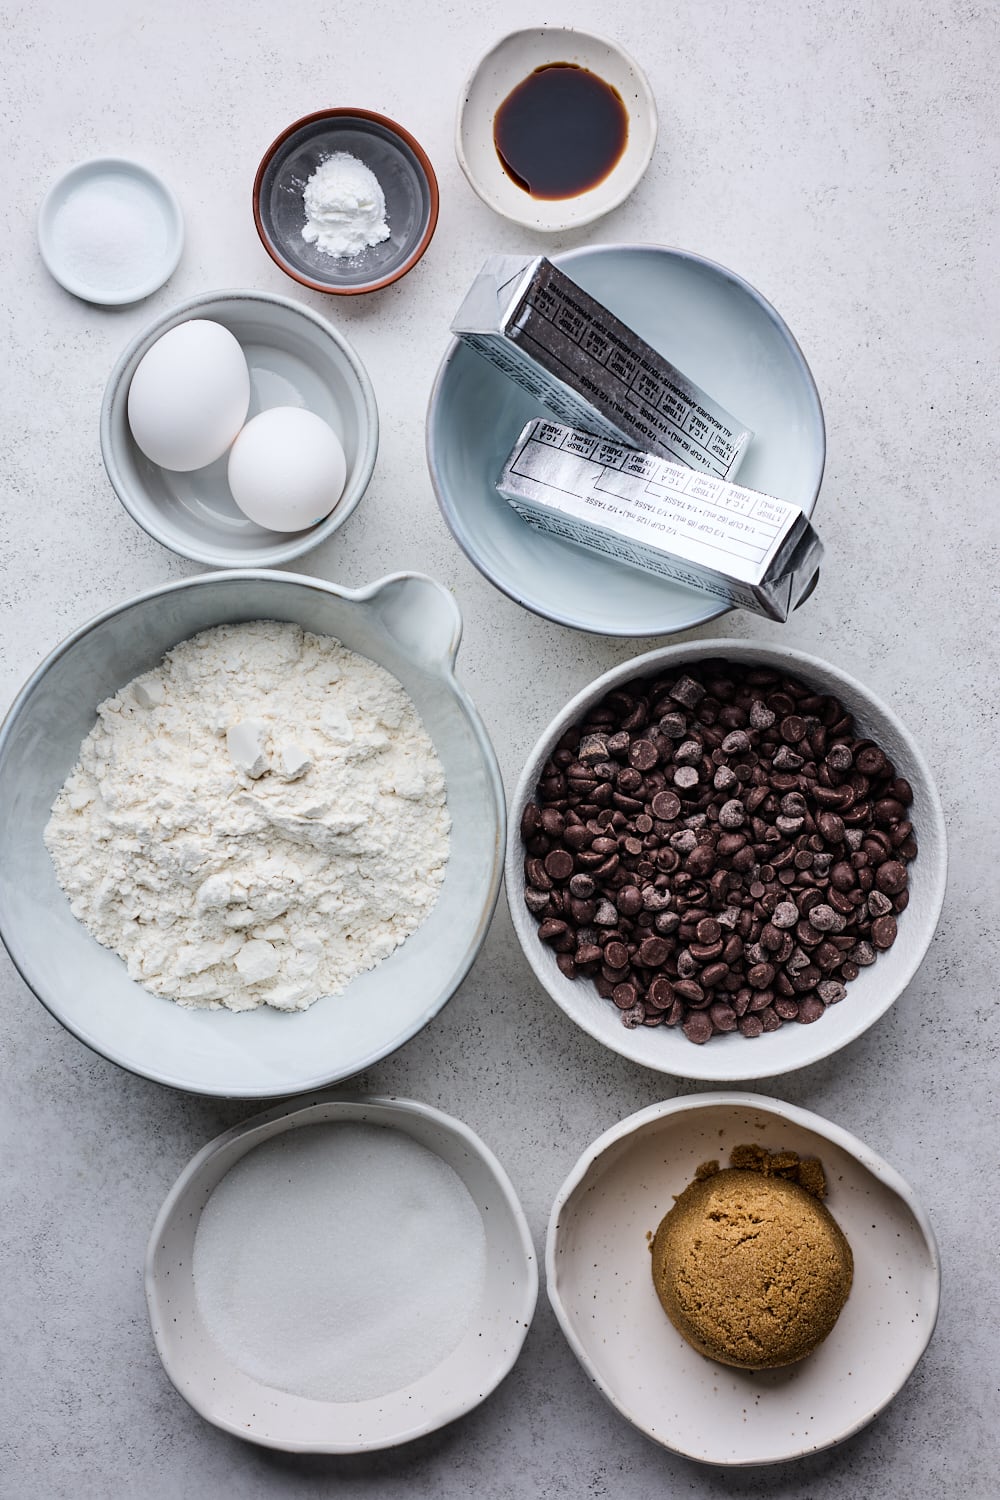 Classic Chocolate Chip Cookie Bars Ingredients